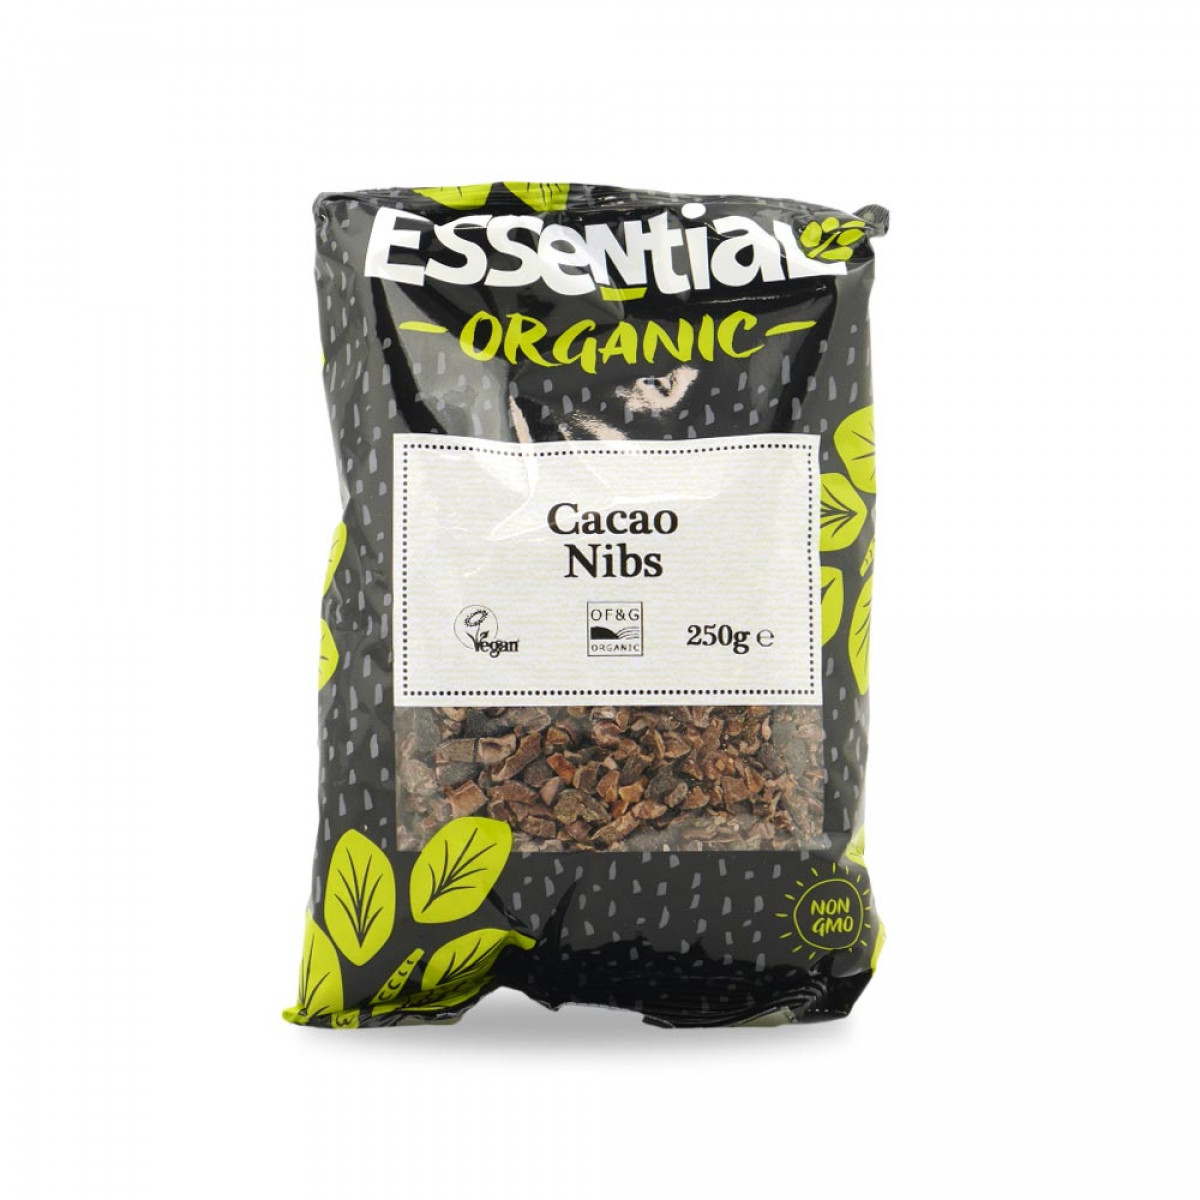 Product picture for Cacao Nibs